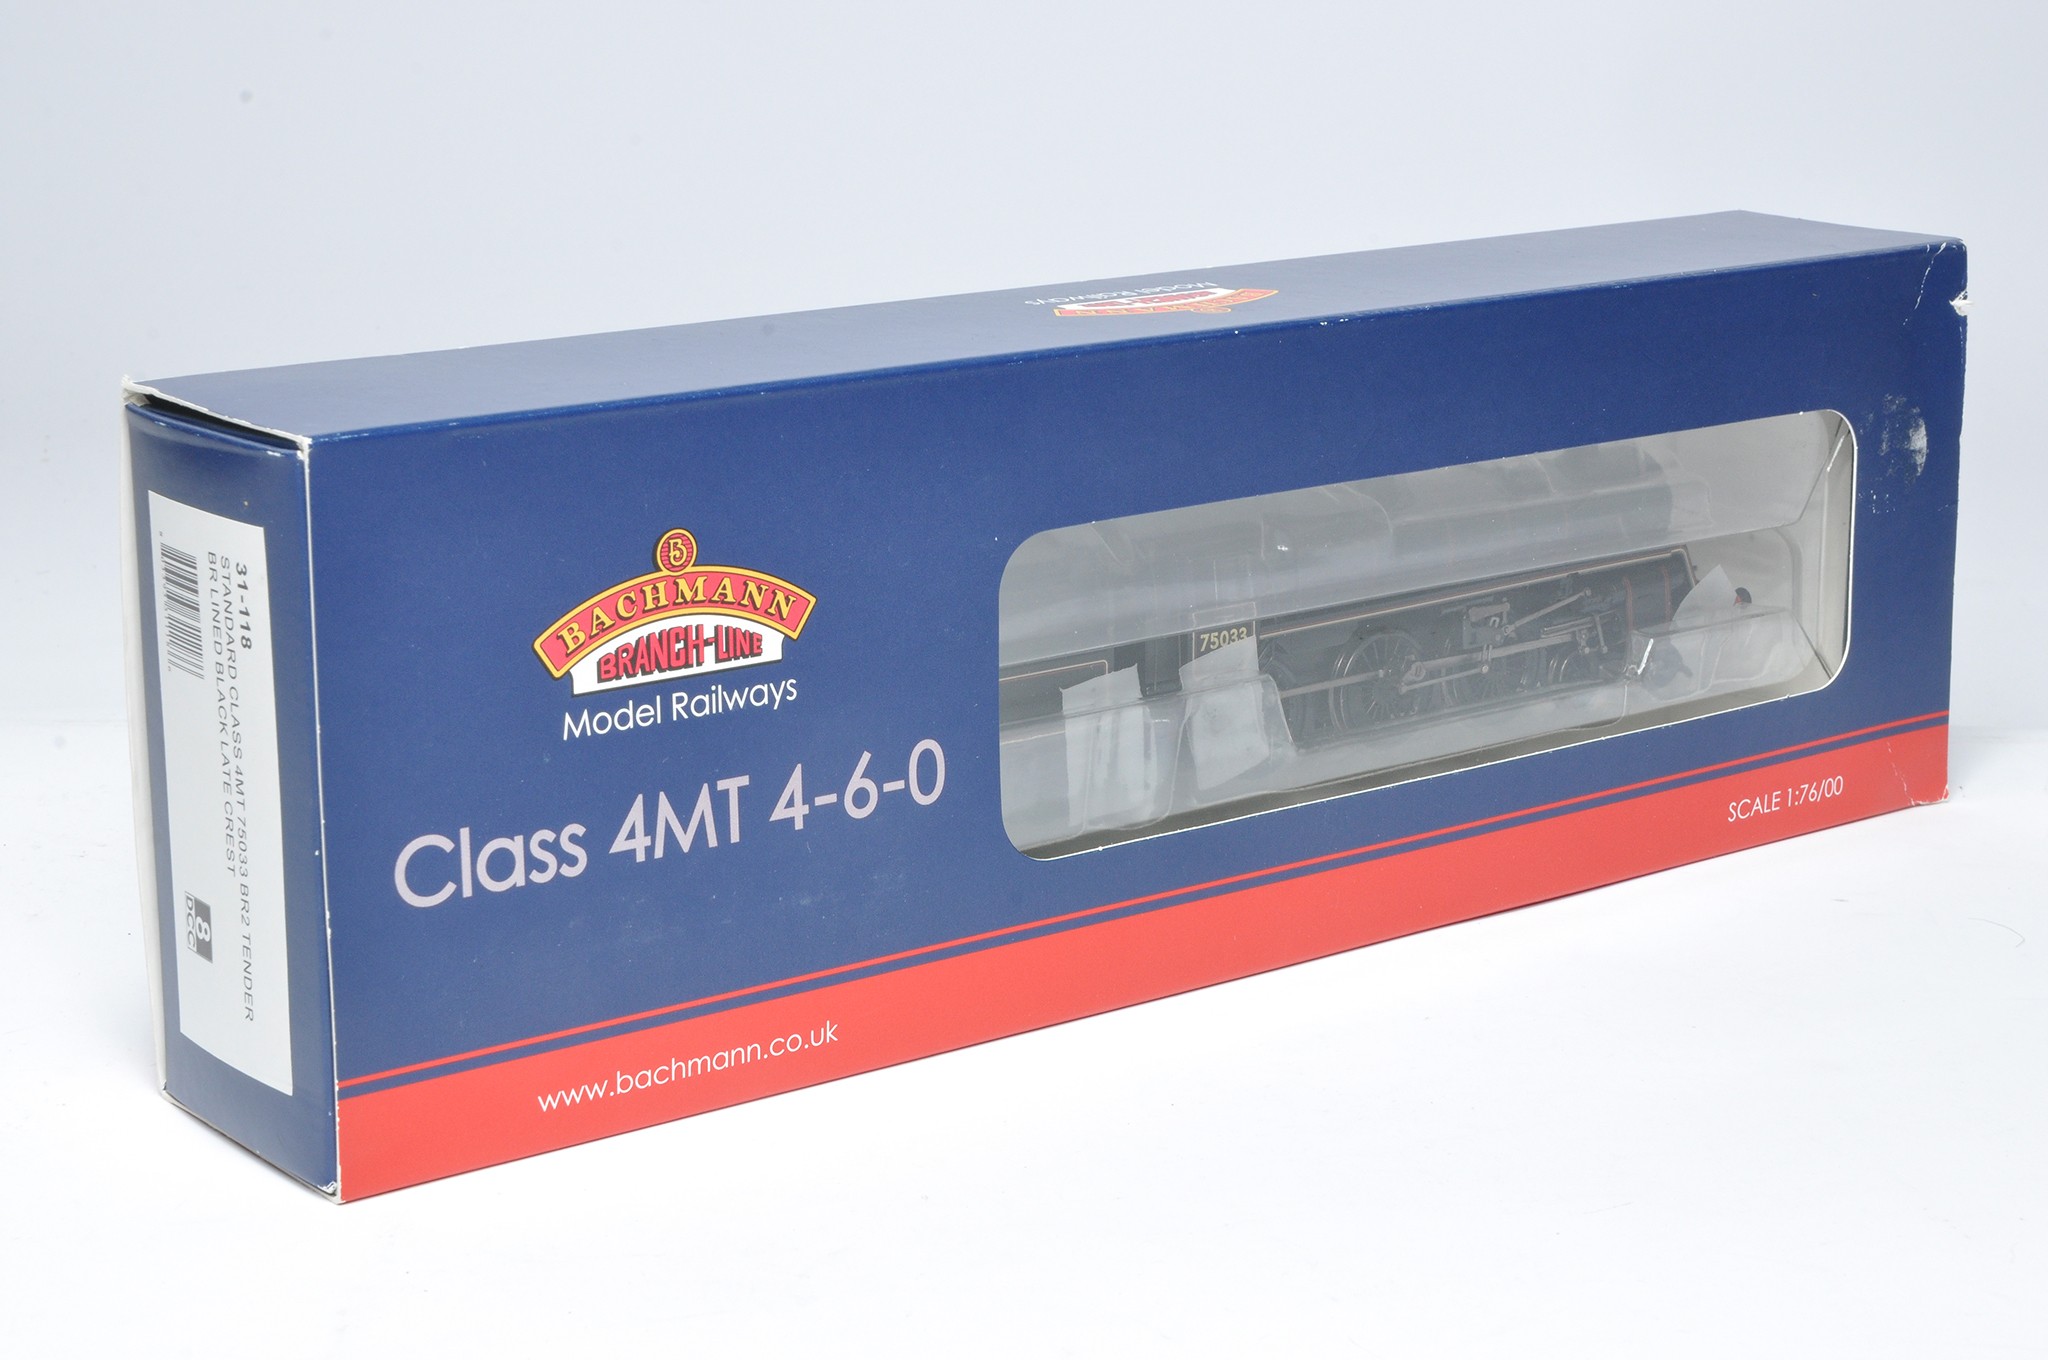 Bachmann Model Railway comprising locomotive issue No. 31-118 Class 4MT 75033. Looks to be without